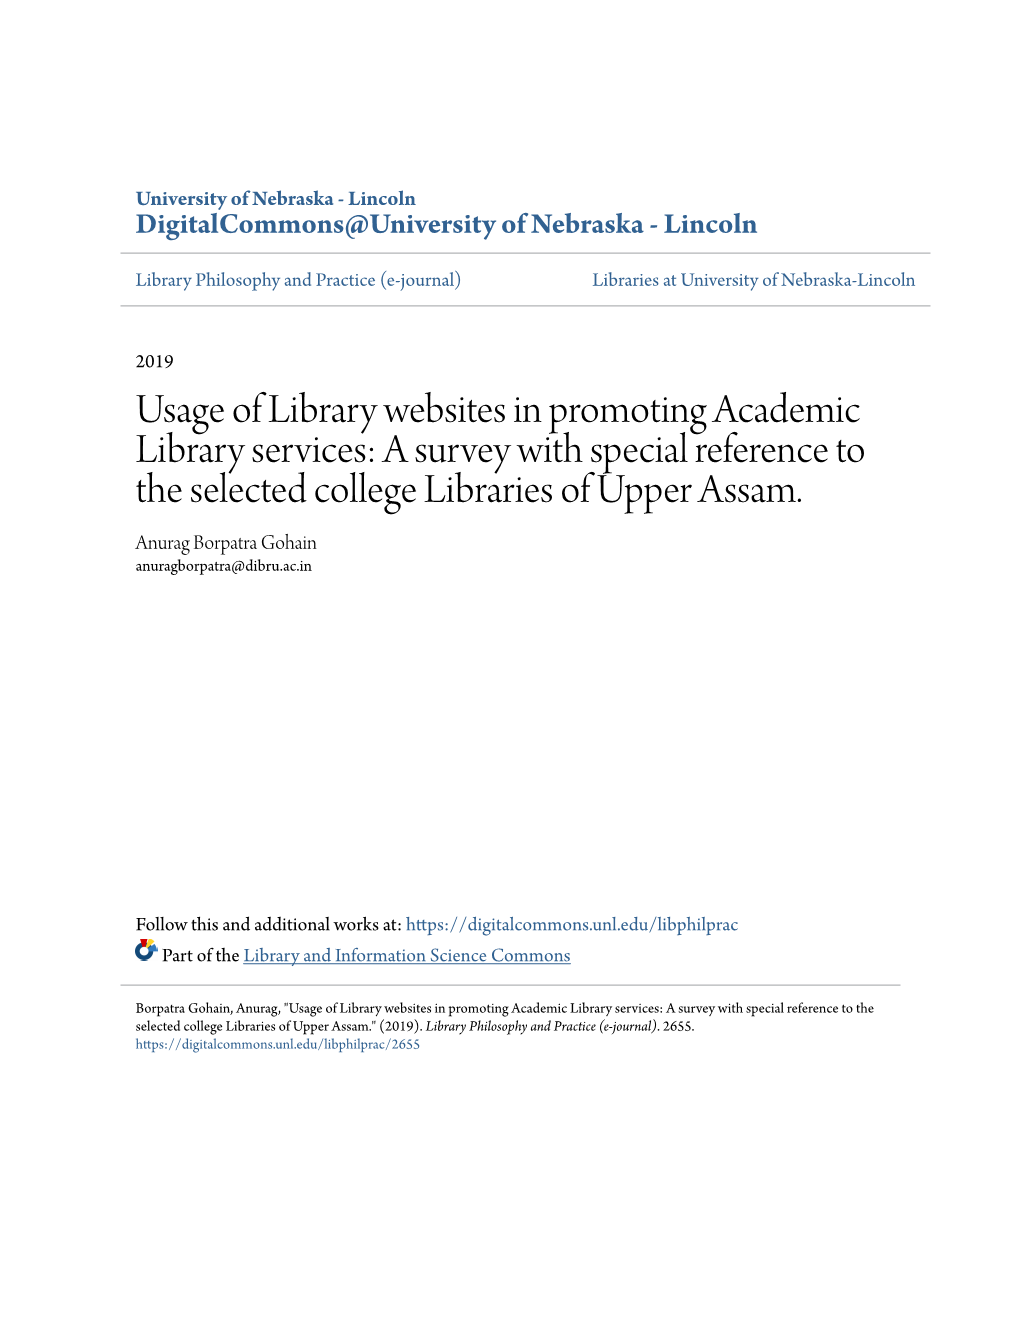 Usage of Library Websites in Promoting Academic Library Services: a Survey with Special Reference to the Selected College Libraries of Upper Assam